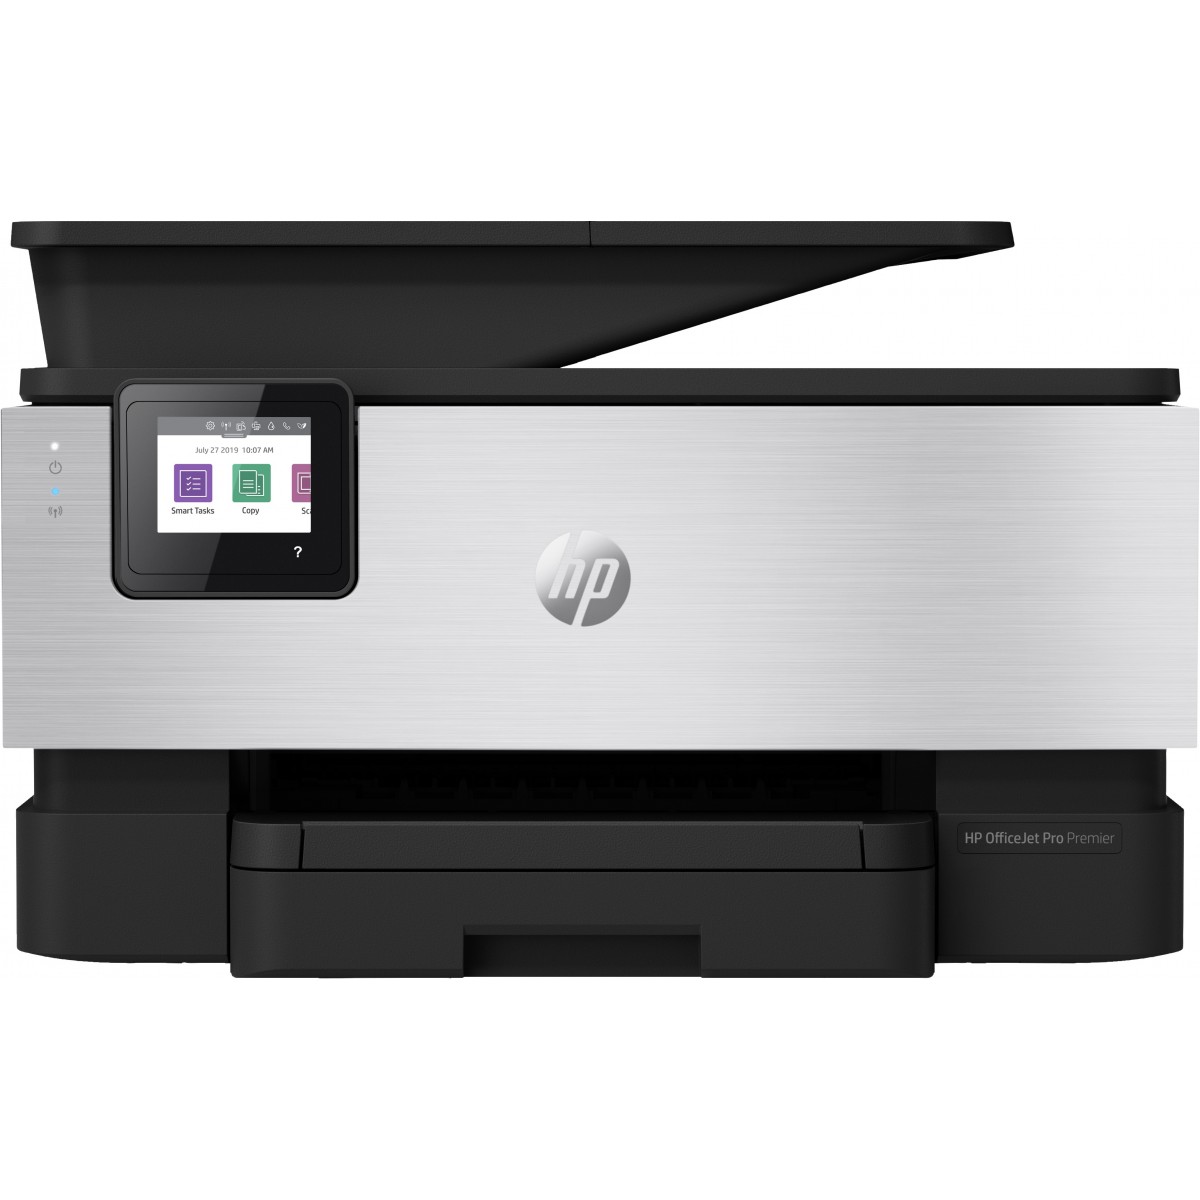 HP OfficeJet Pro 9019 - Thermal inkjet - Colour printing - 4800 x 1200 DPI - A4 - Direct printing - Black - Silver - White